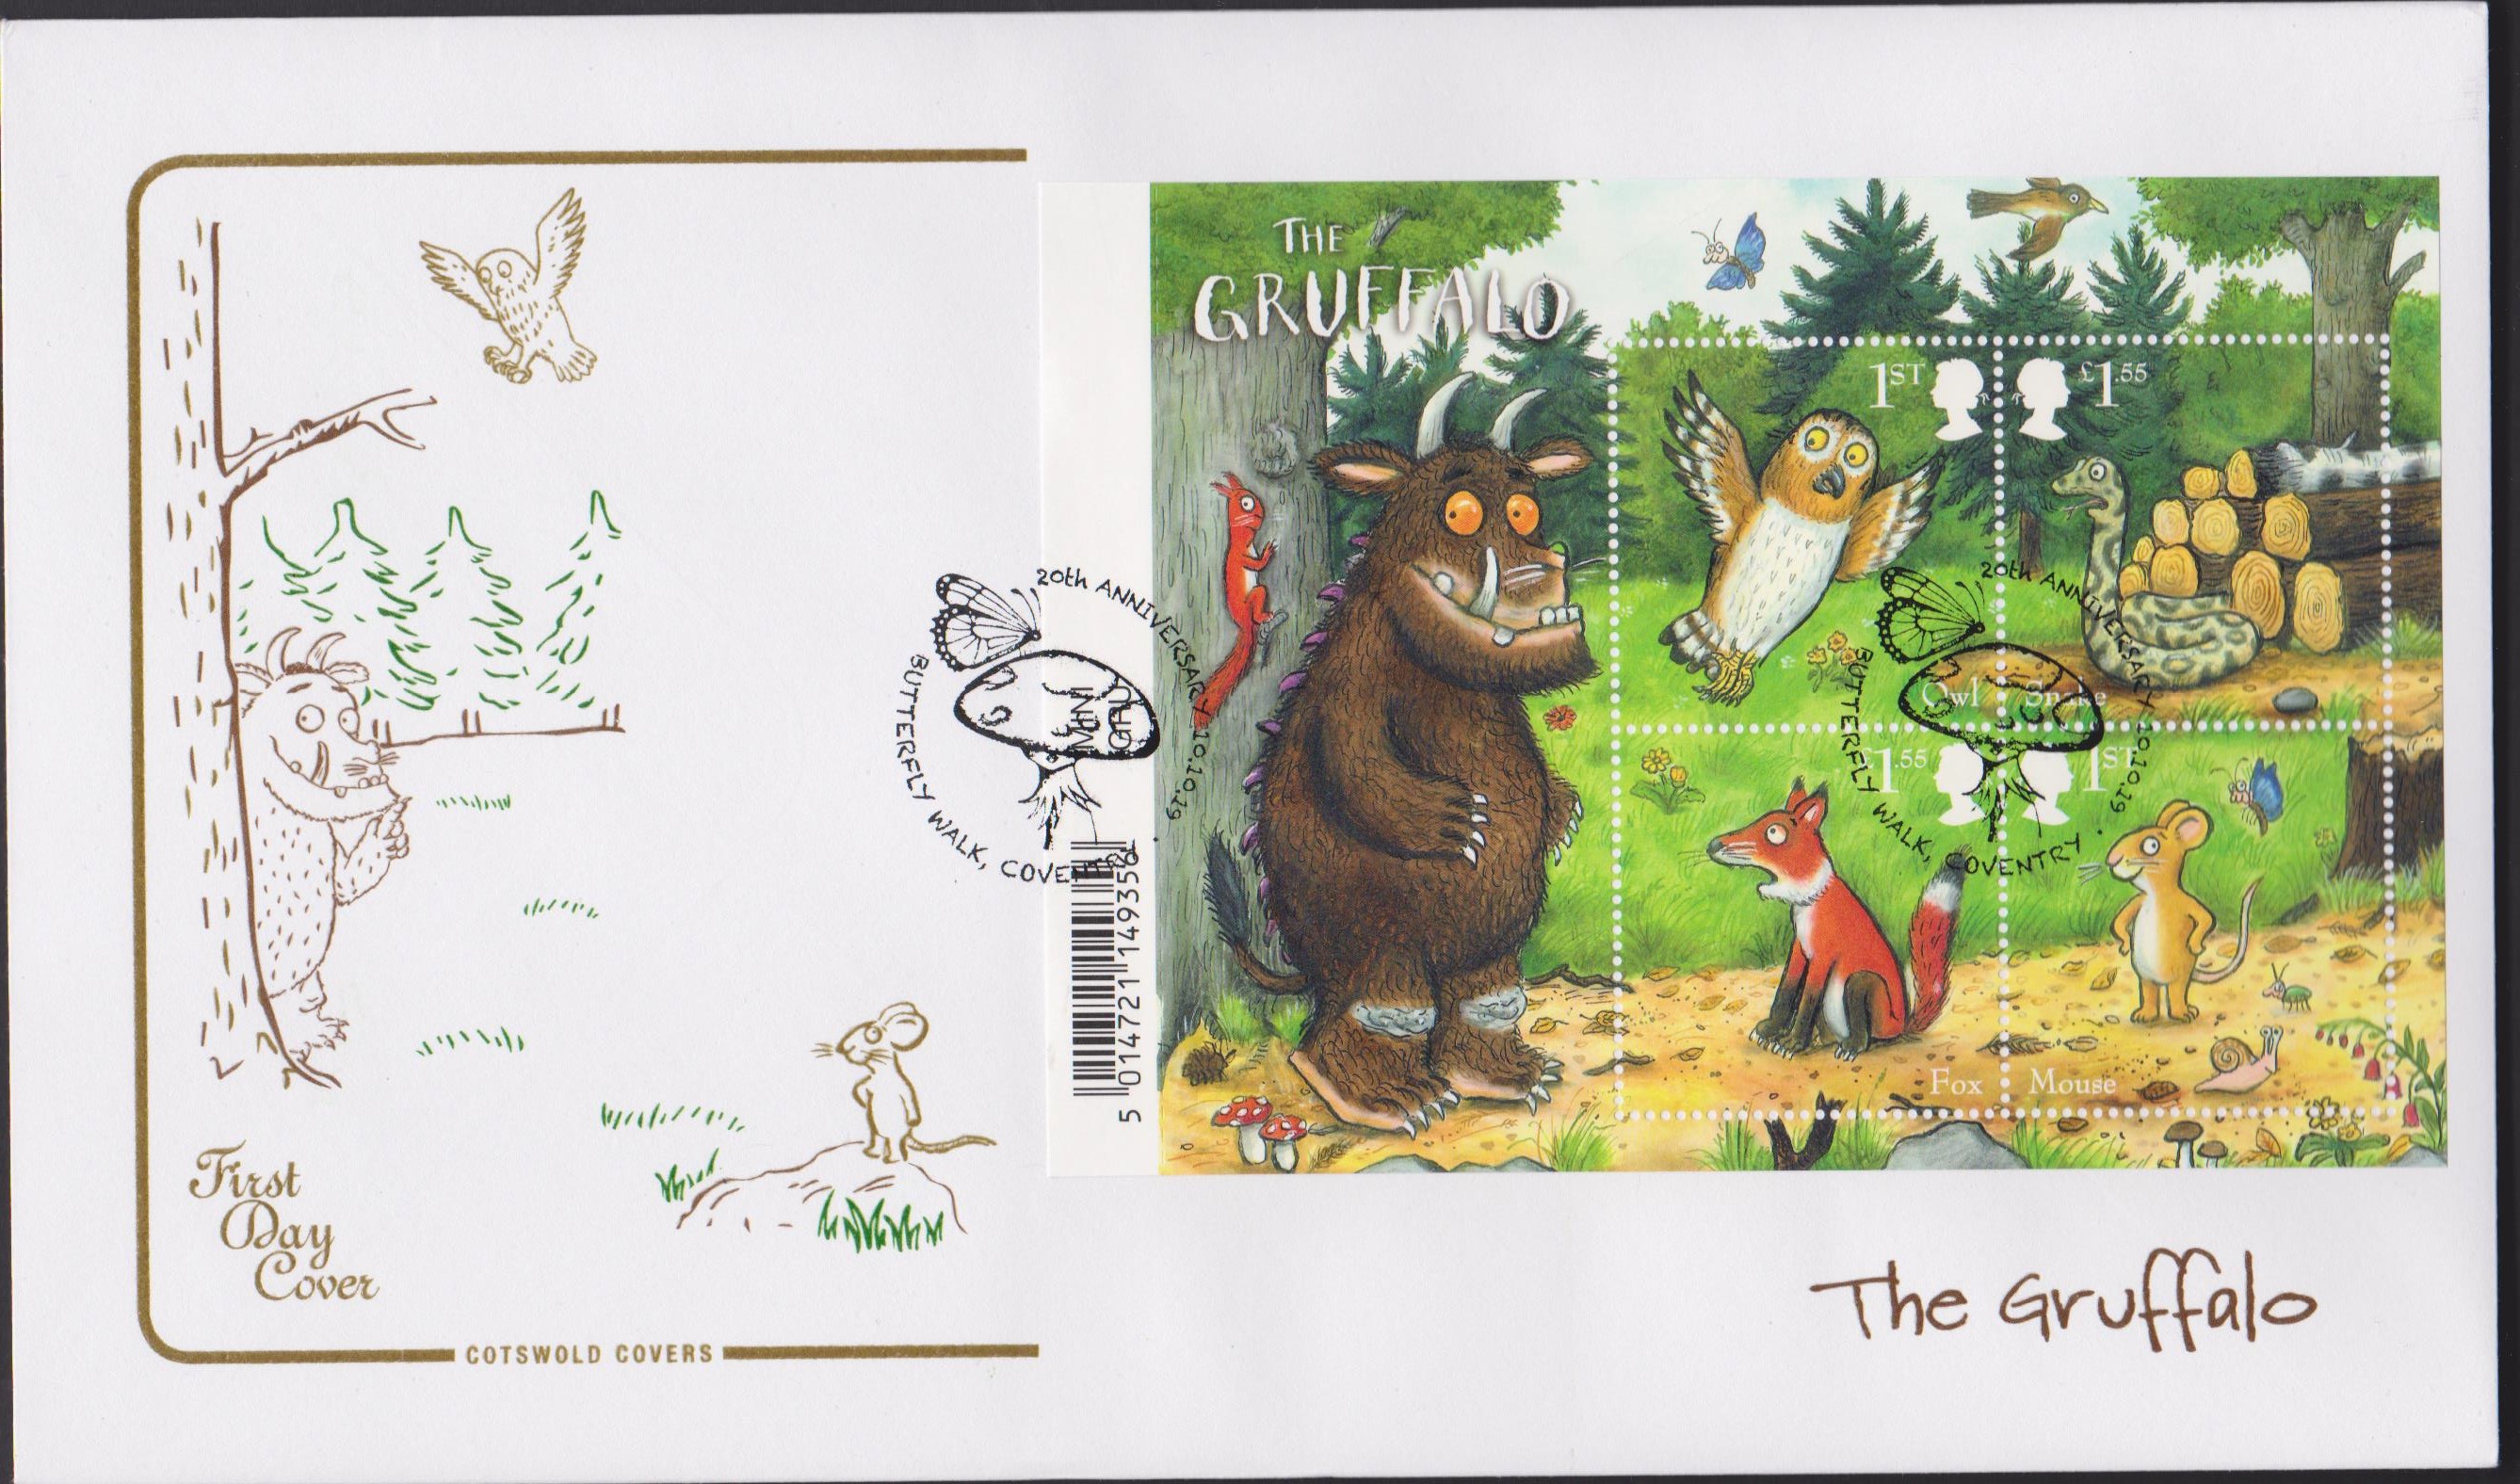 2019 FDC -Gruffalo Mini Sheet FDC Butterfly Walk, Coventry Postmark - Click Image to Close